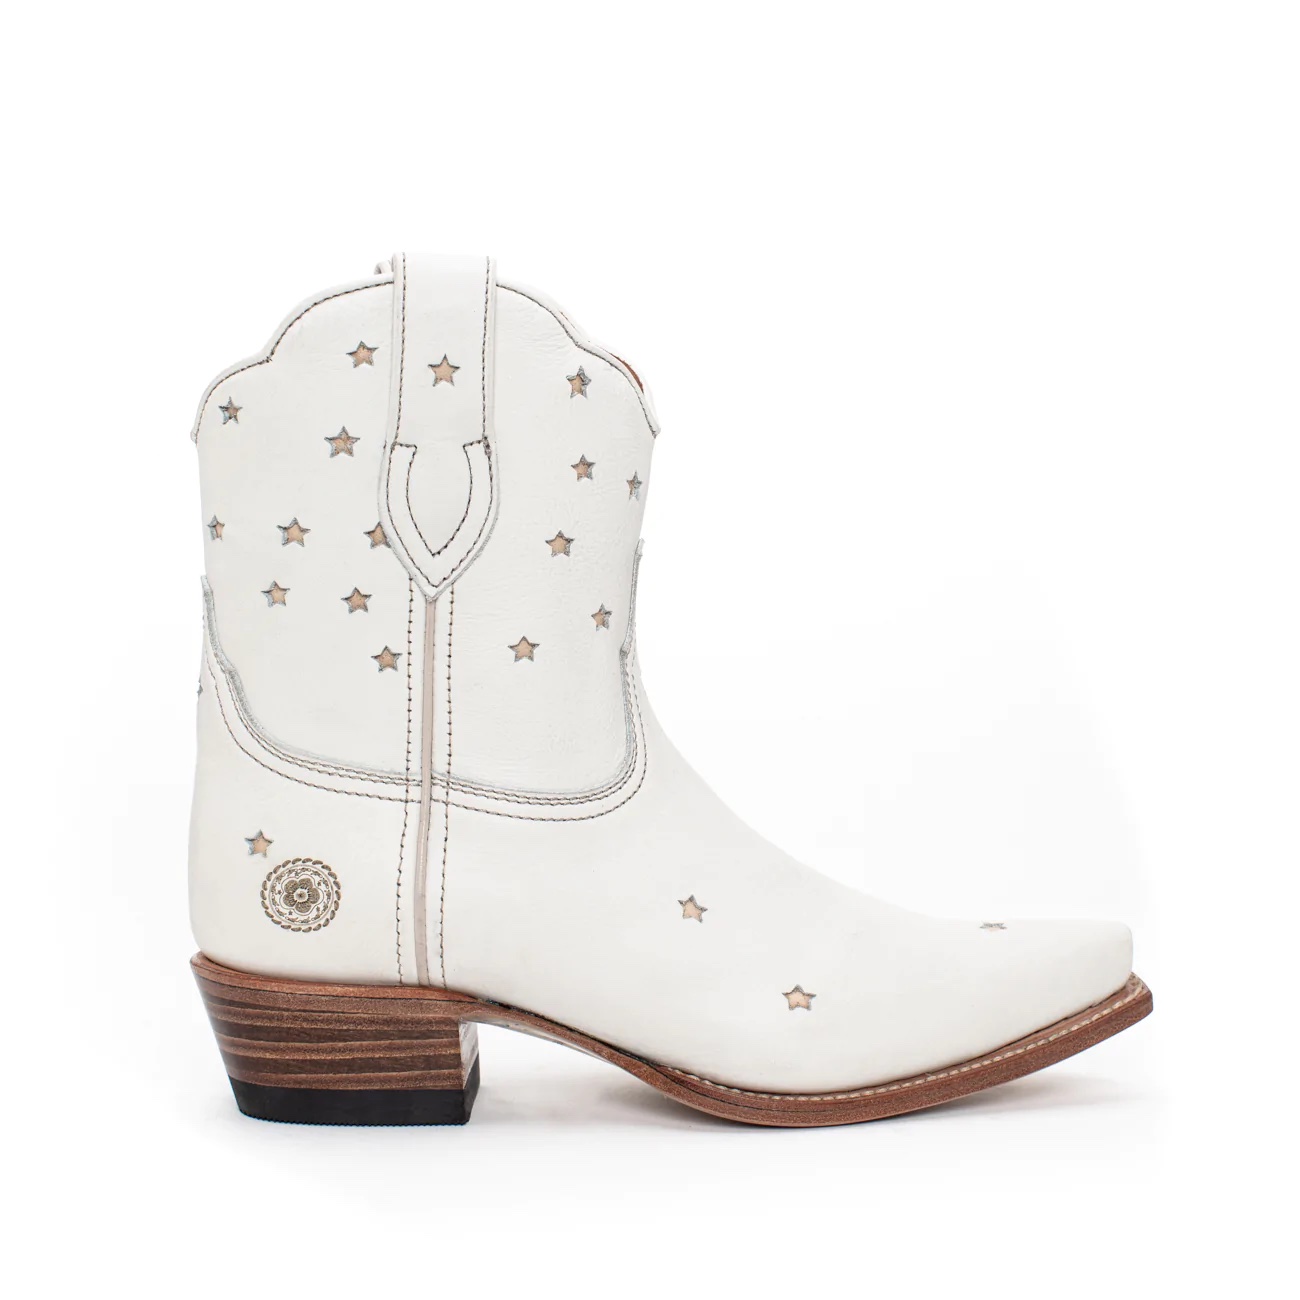 Ranch road presidio short western boots with stars